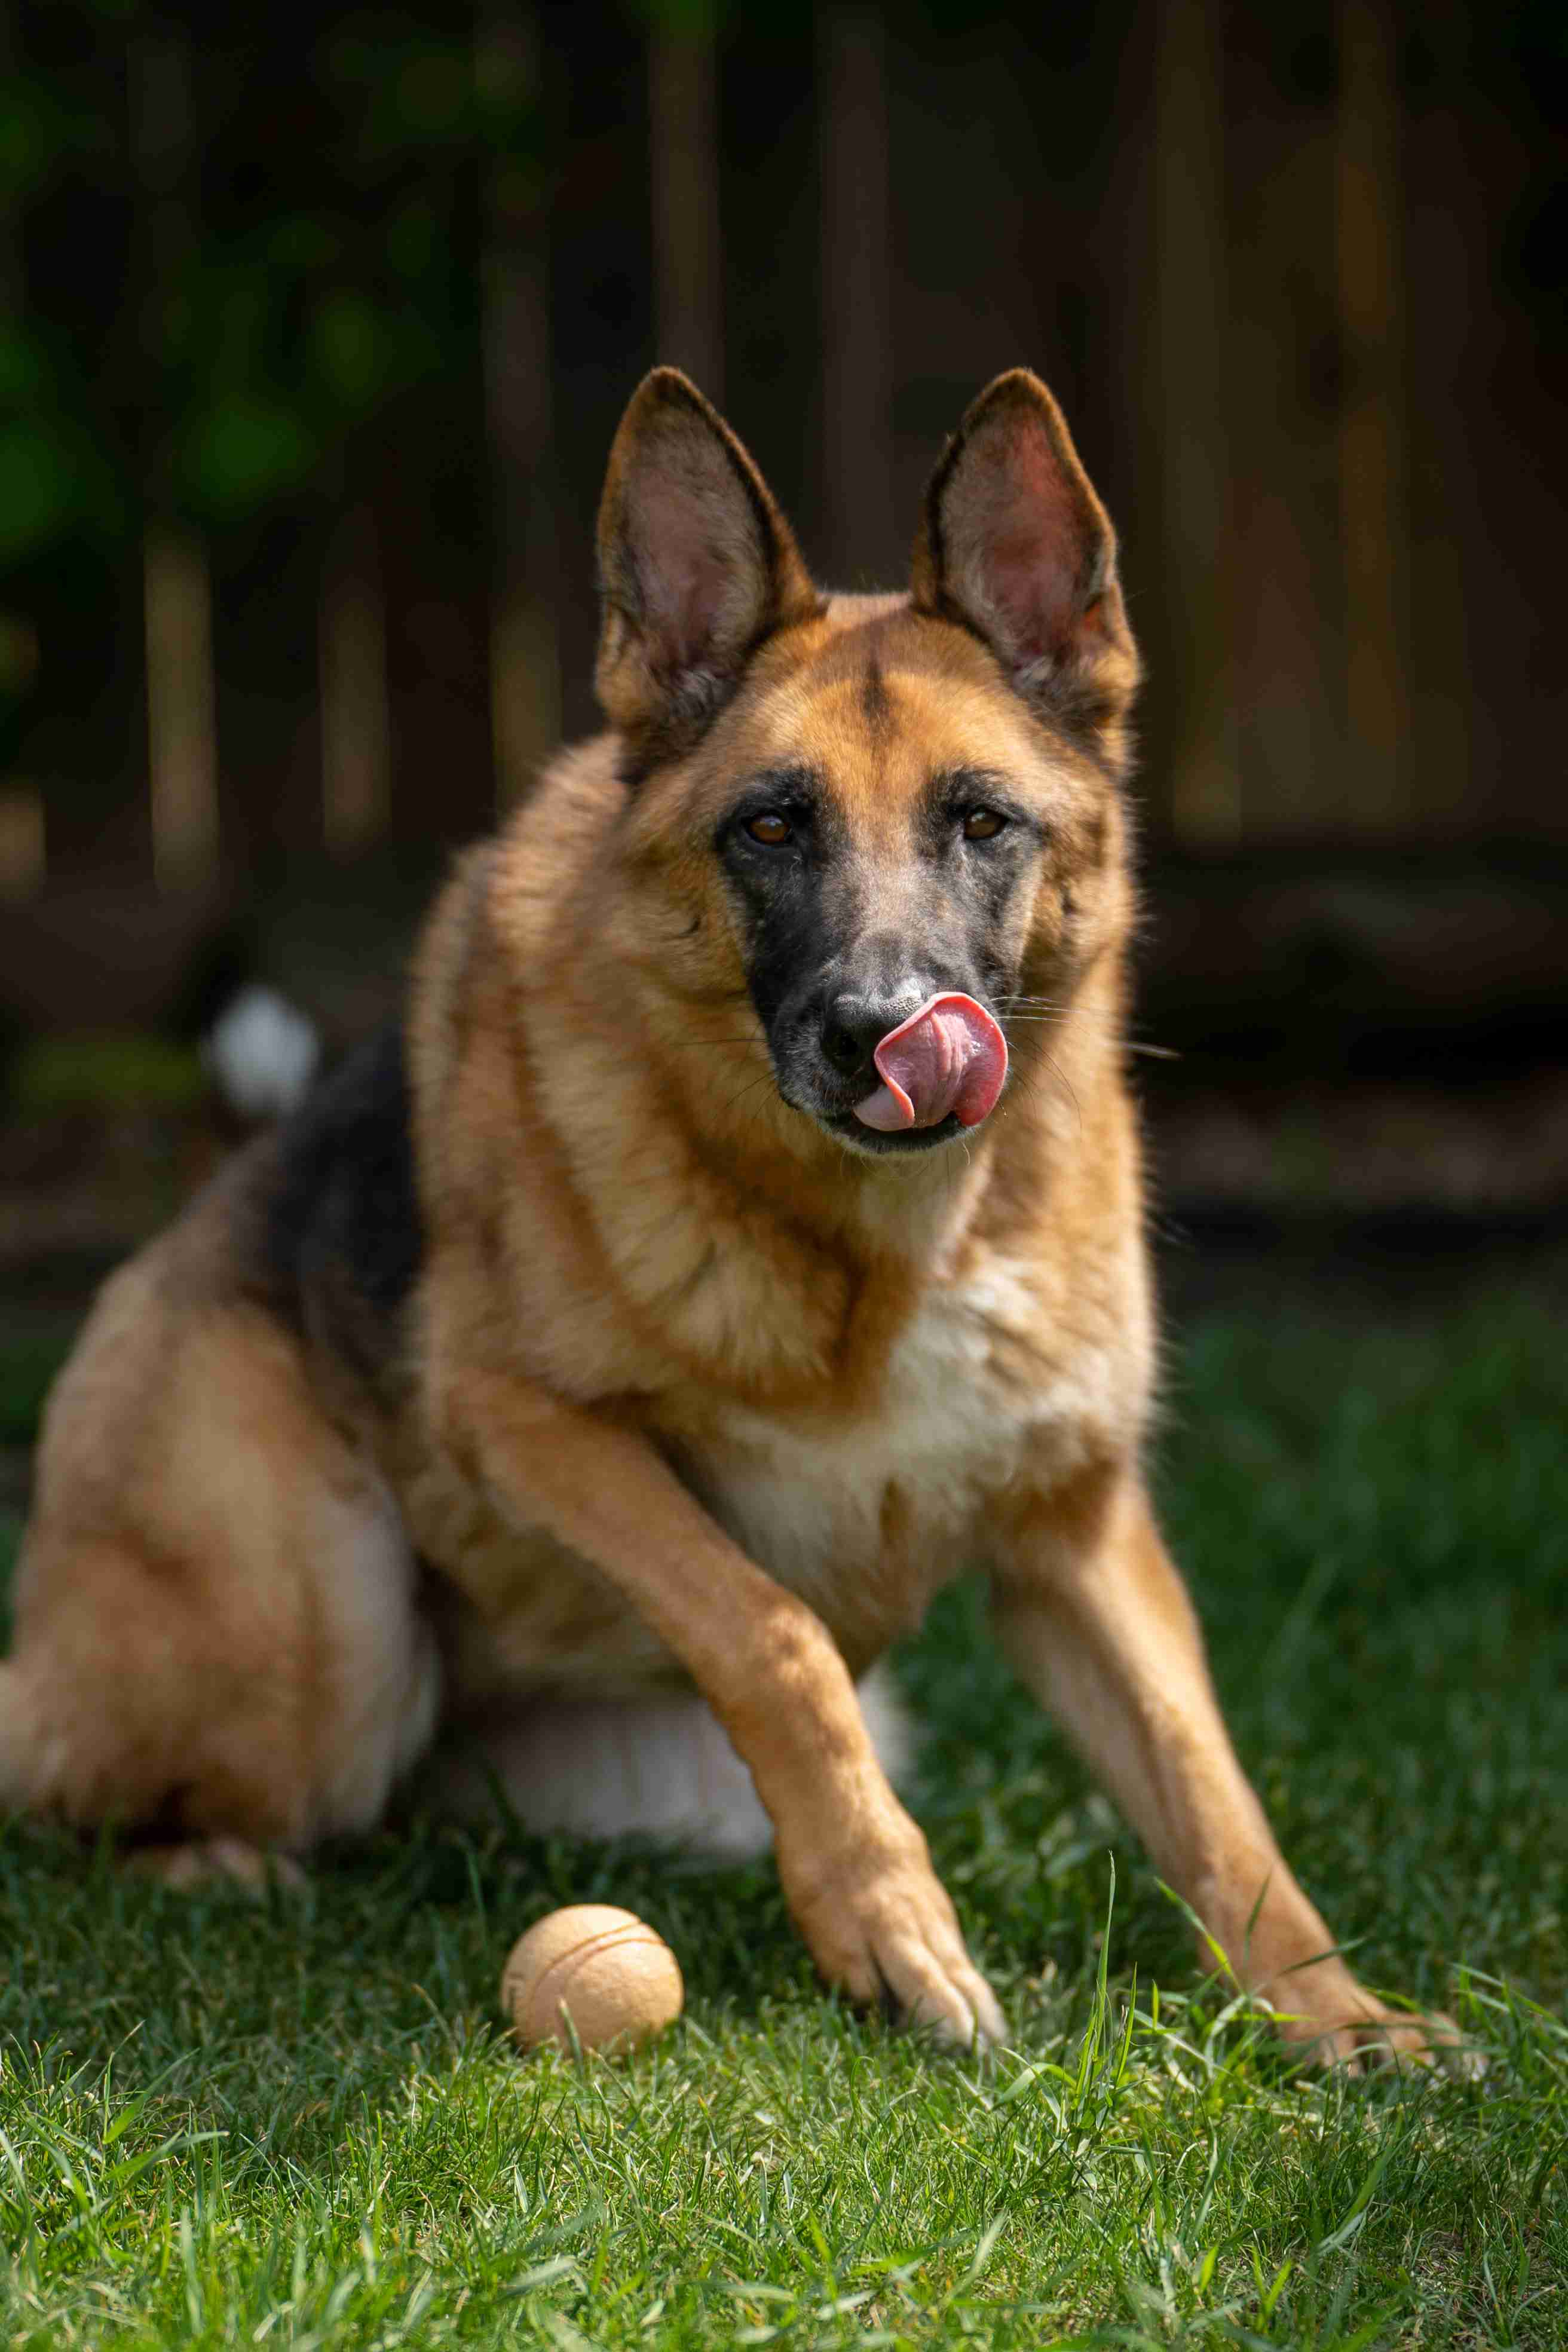 What kind of training is necessary for a German Shepherd living in an apartment?